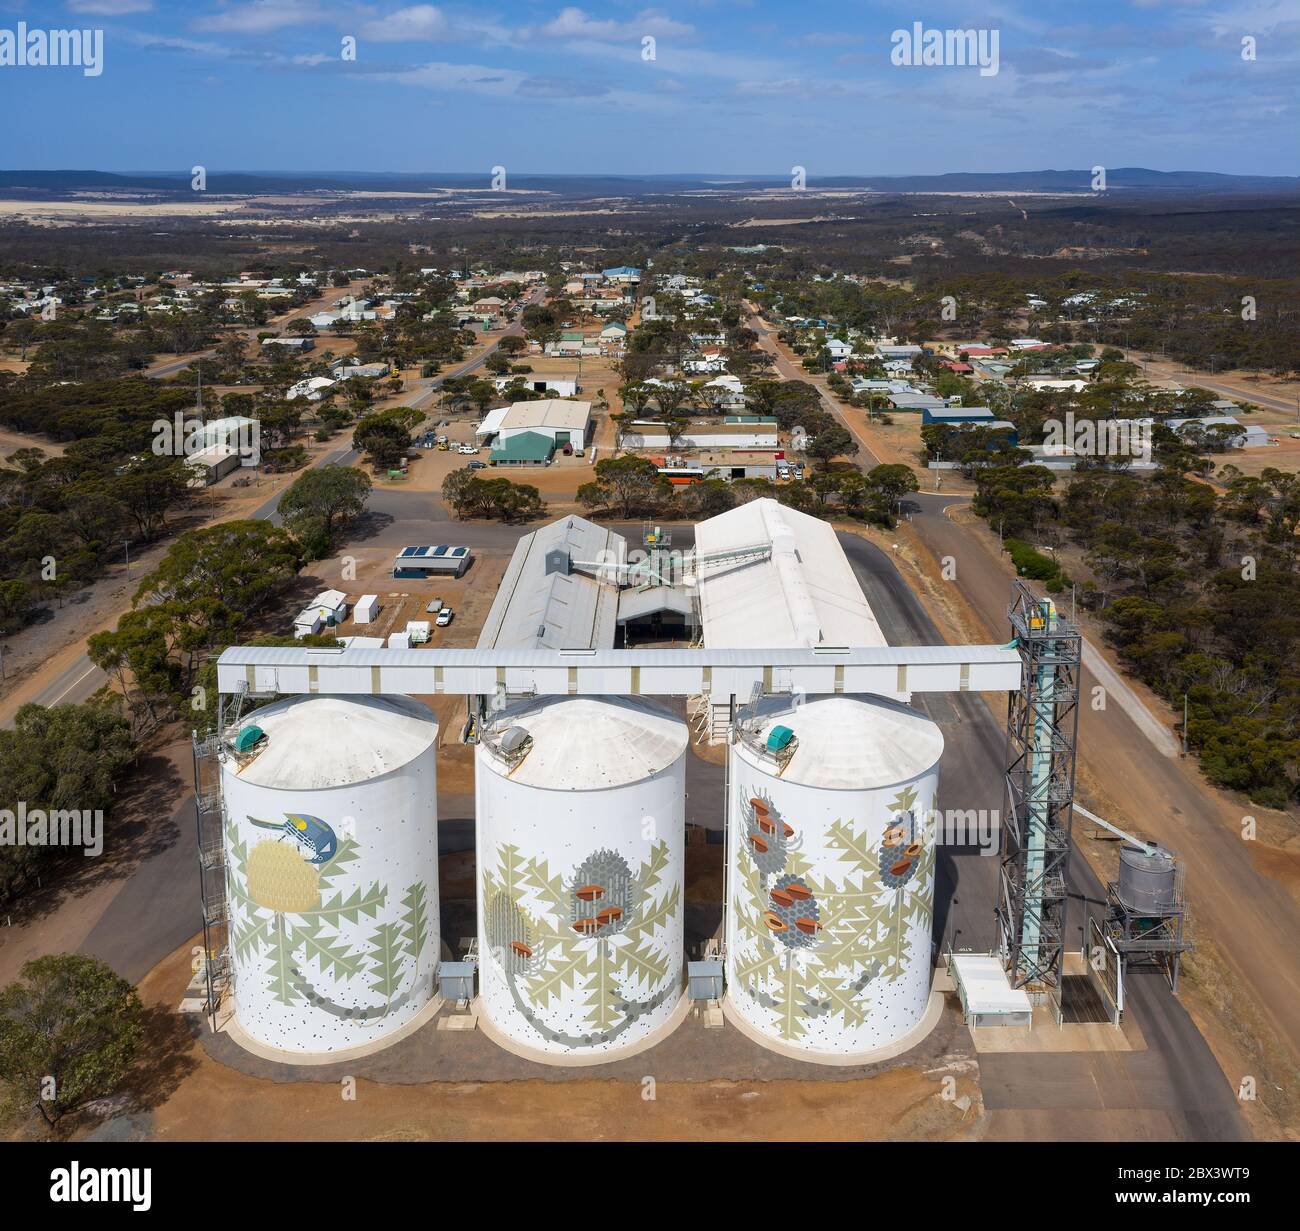 Ravensthorpe Western Australia Noveber 11th 2019 : Aerial view of the grain silos and town of Ravensthorpe on the South Coast Highway, Western Austral Stock Photo